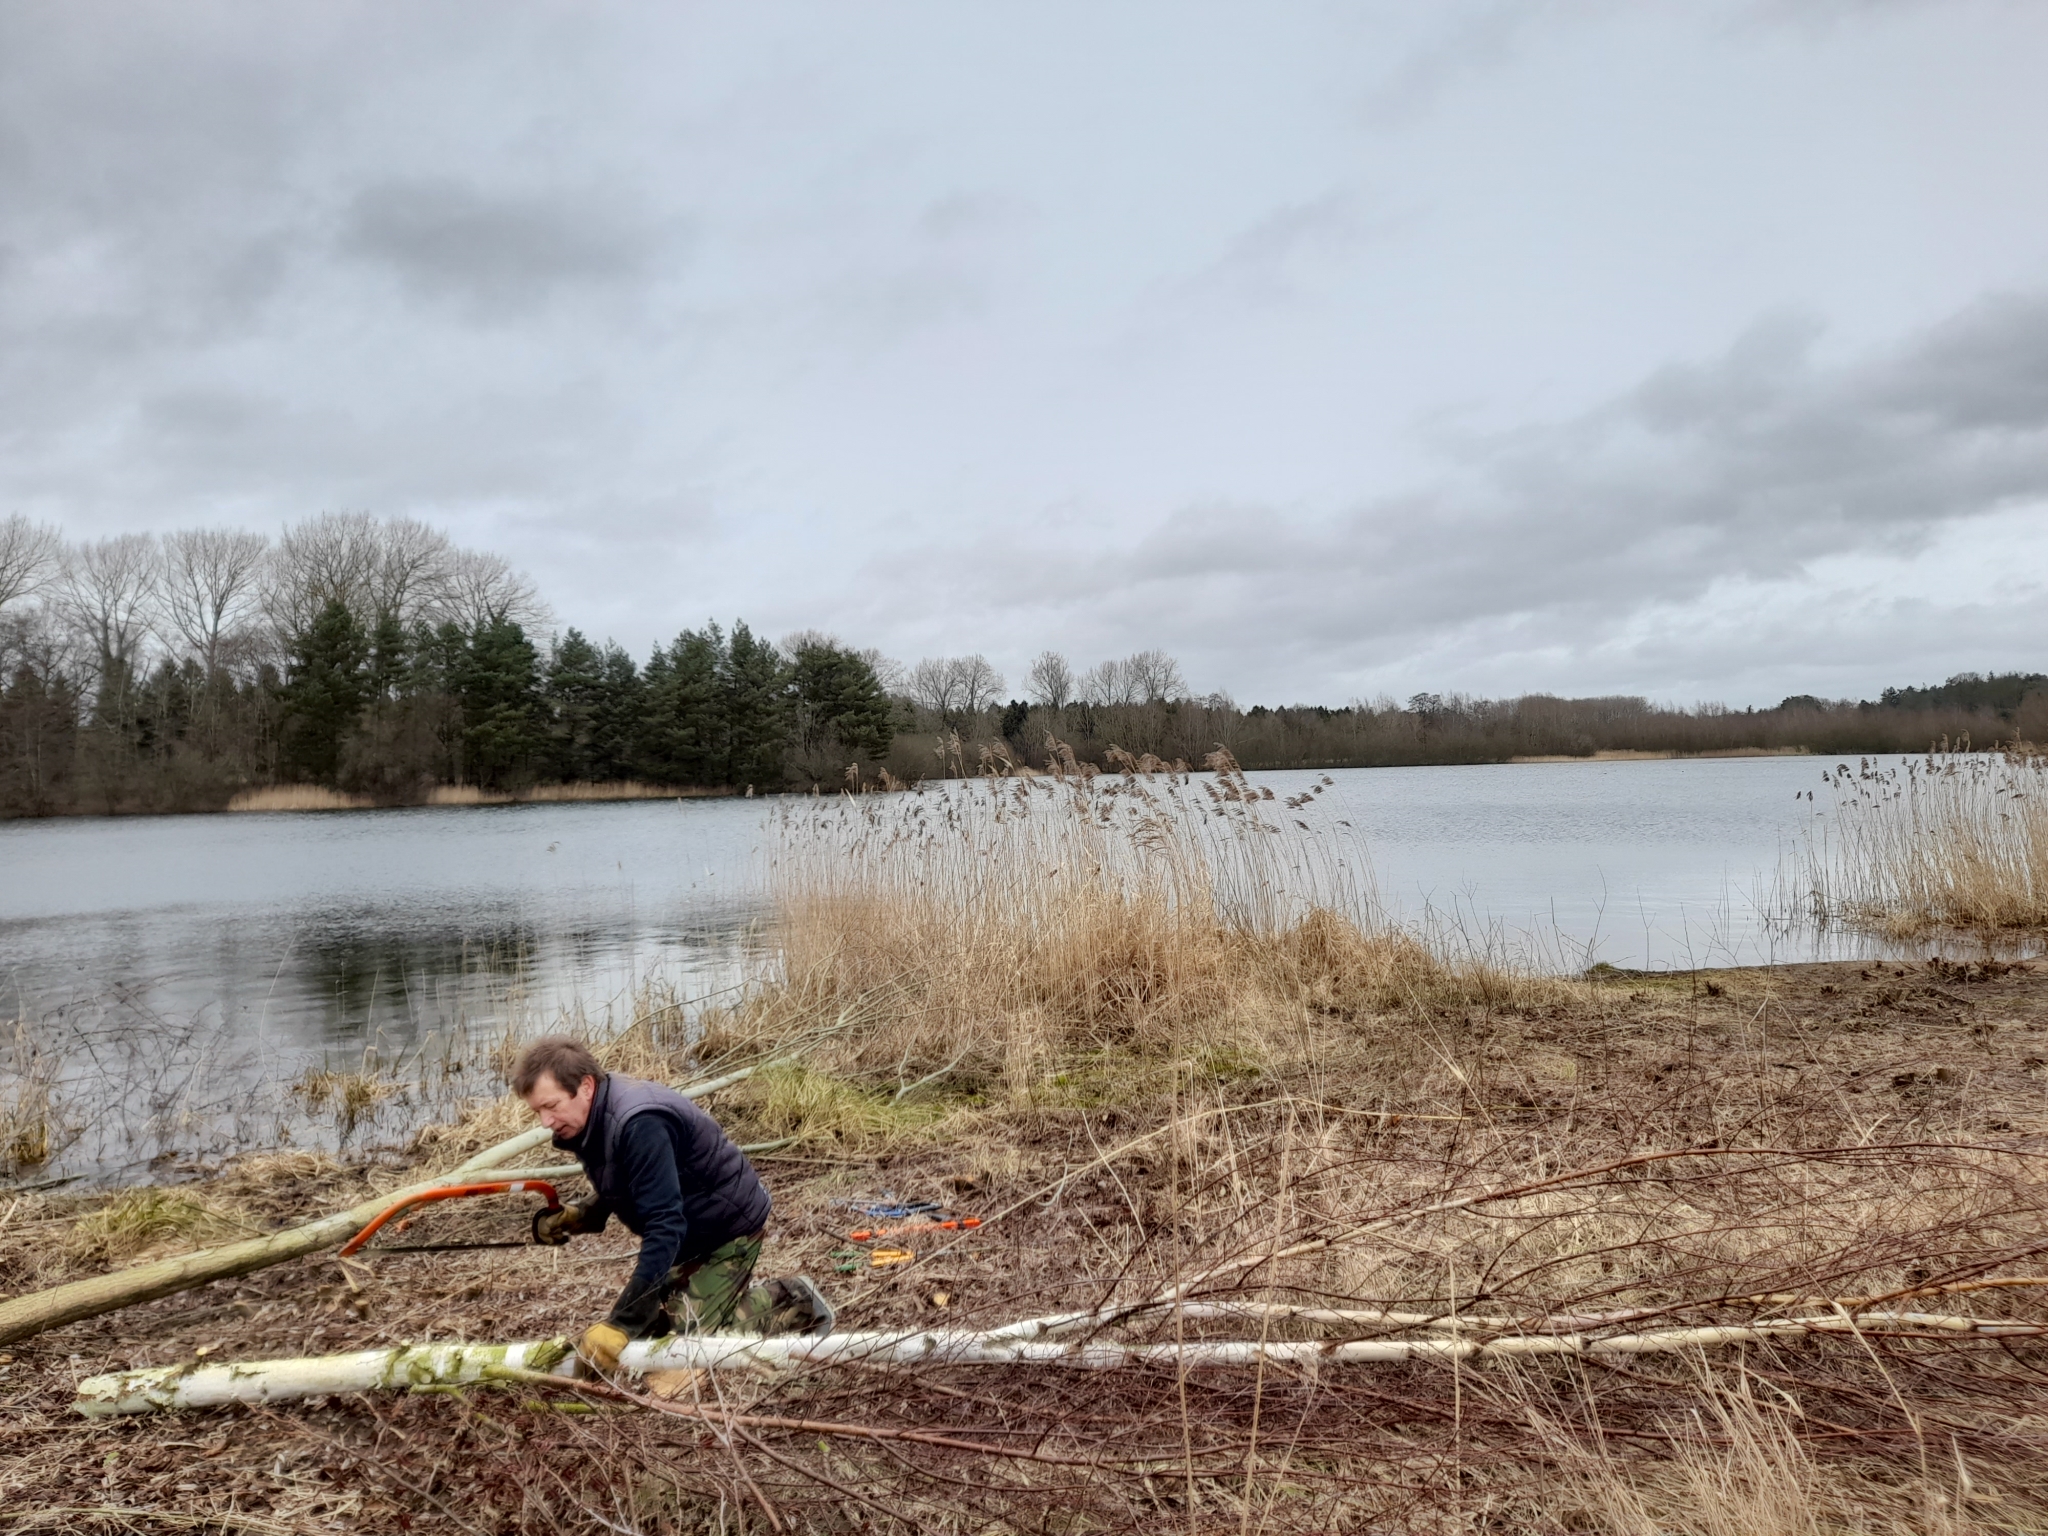 A photo from the FoTF Conservation Event - February 2022 - Clearing overgrowth at Lynford Water : A volunteer holds a saw and prepares to cut a willow trunk